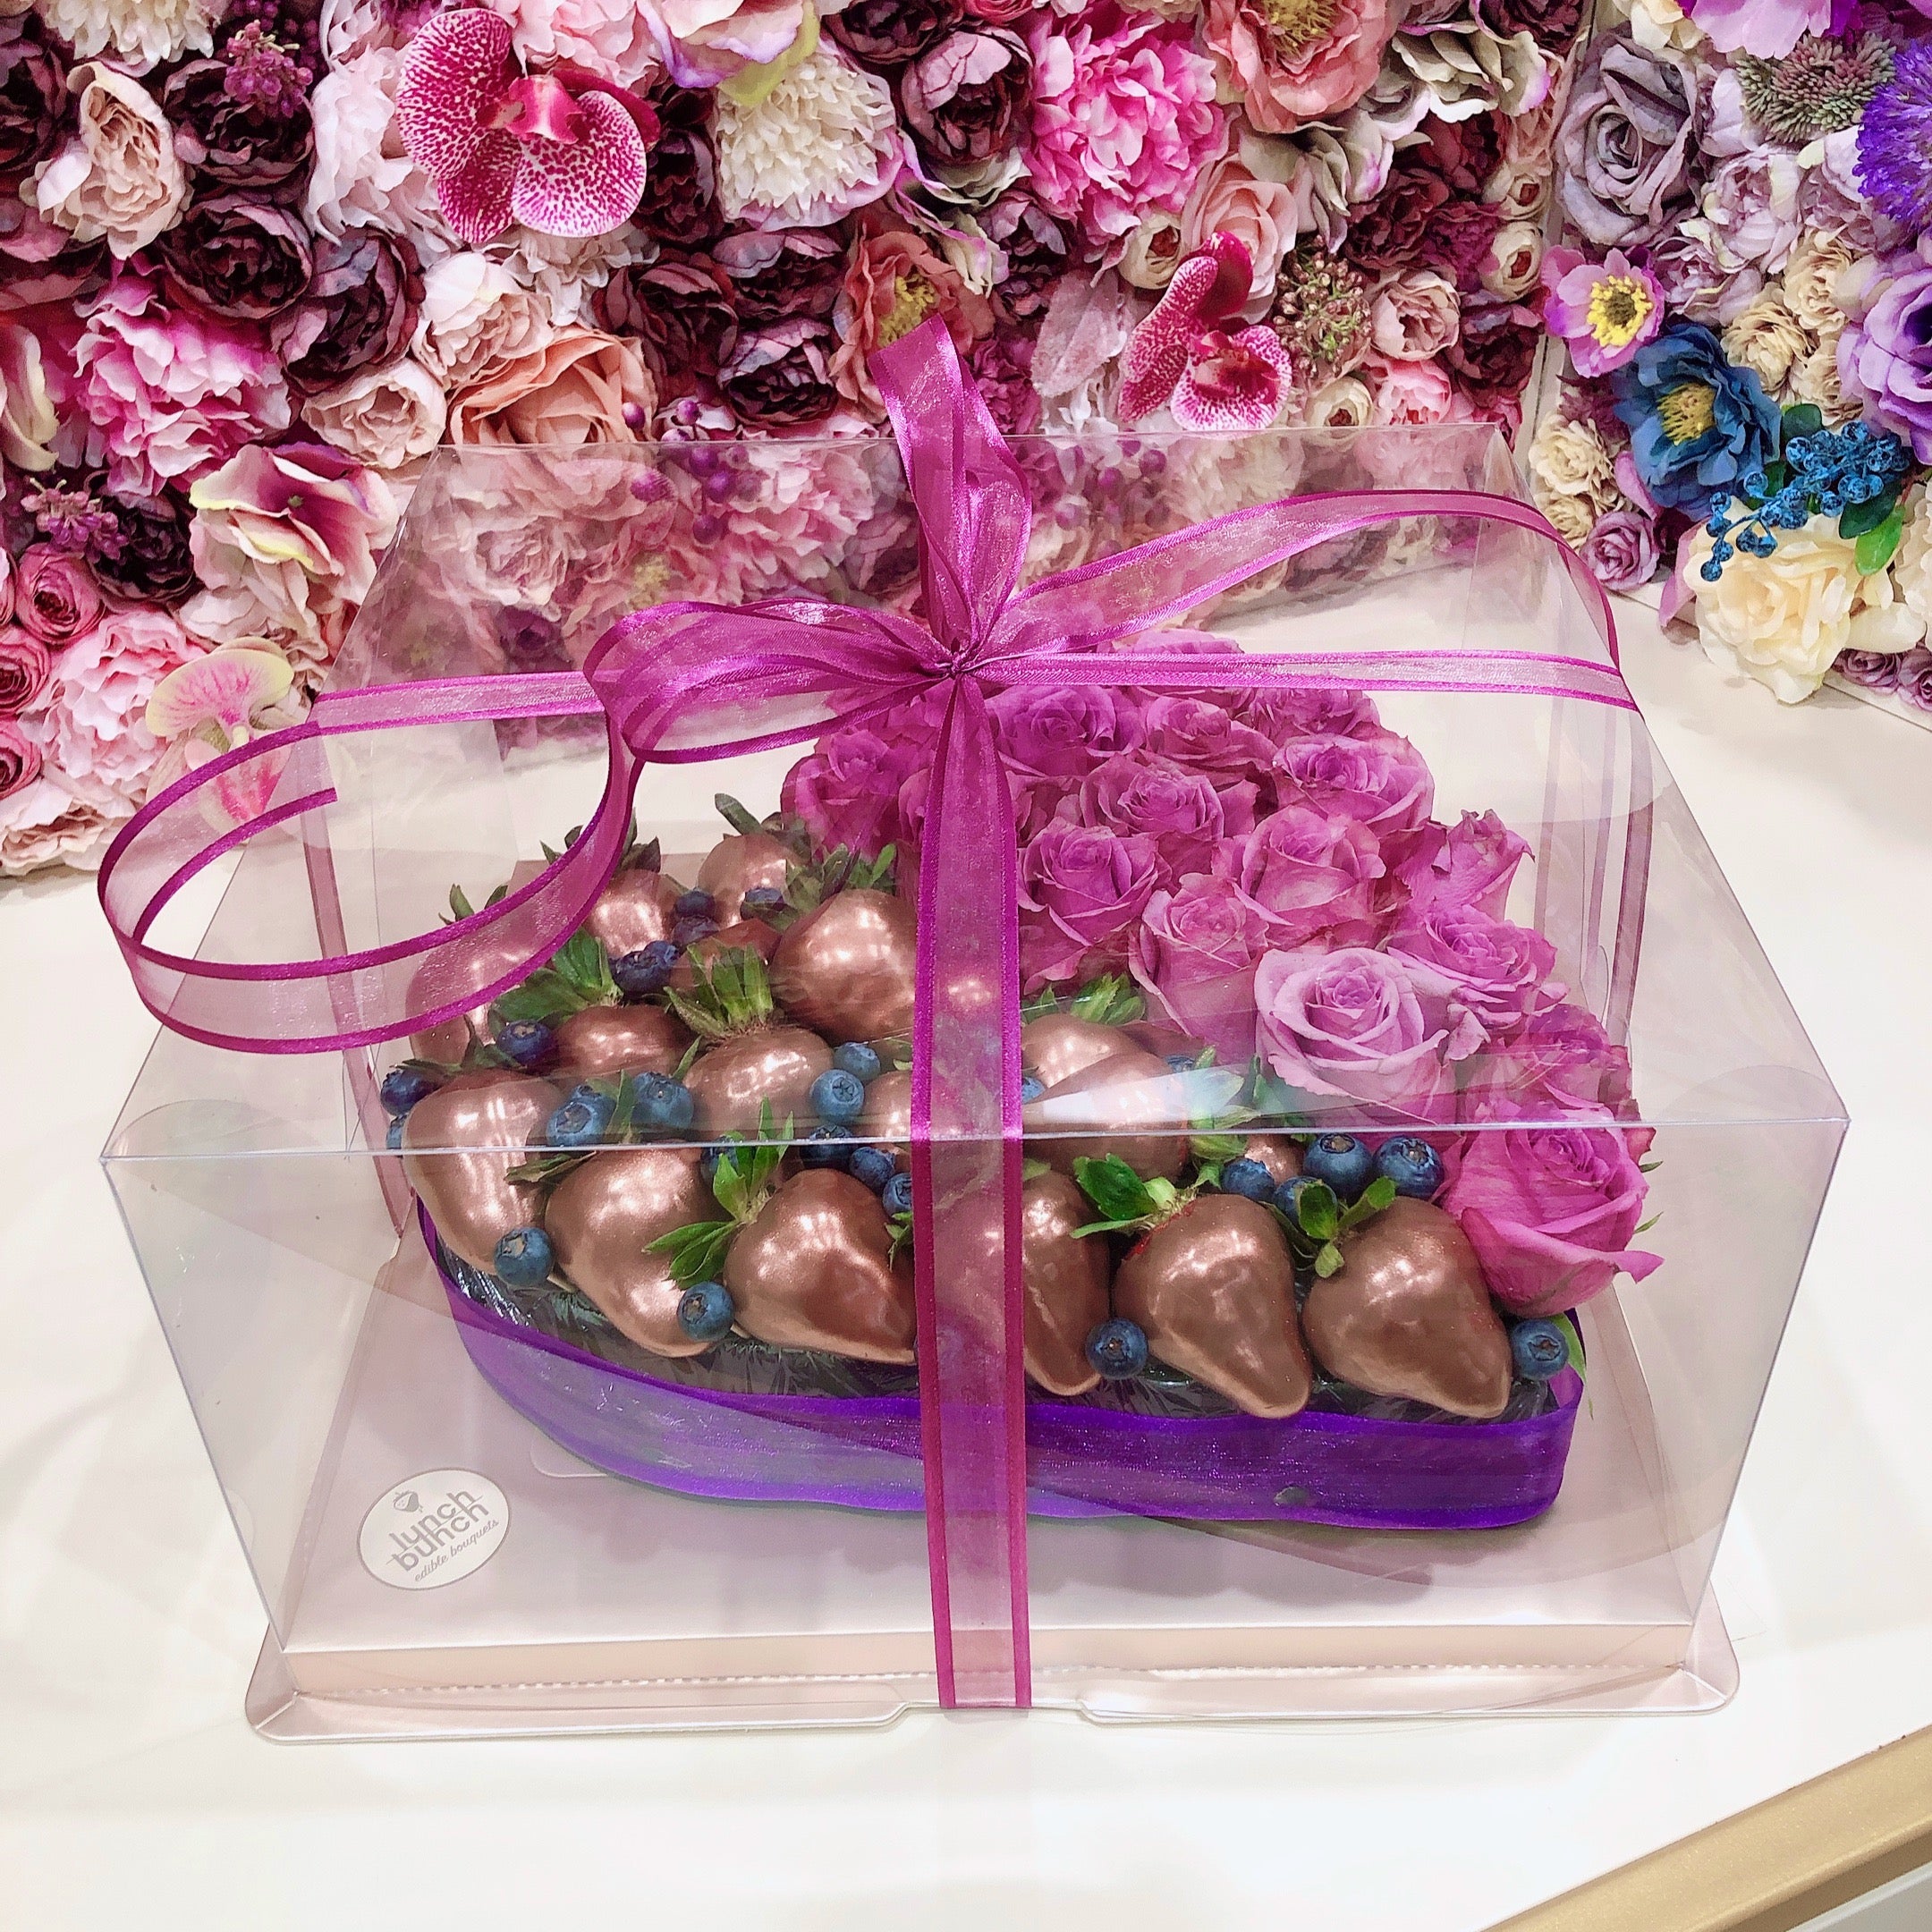 Dozen of roses in love heart box with chocolate covered strawberries for romantic gift same day delivery